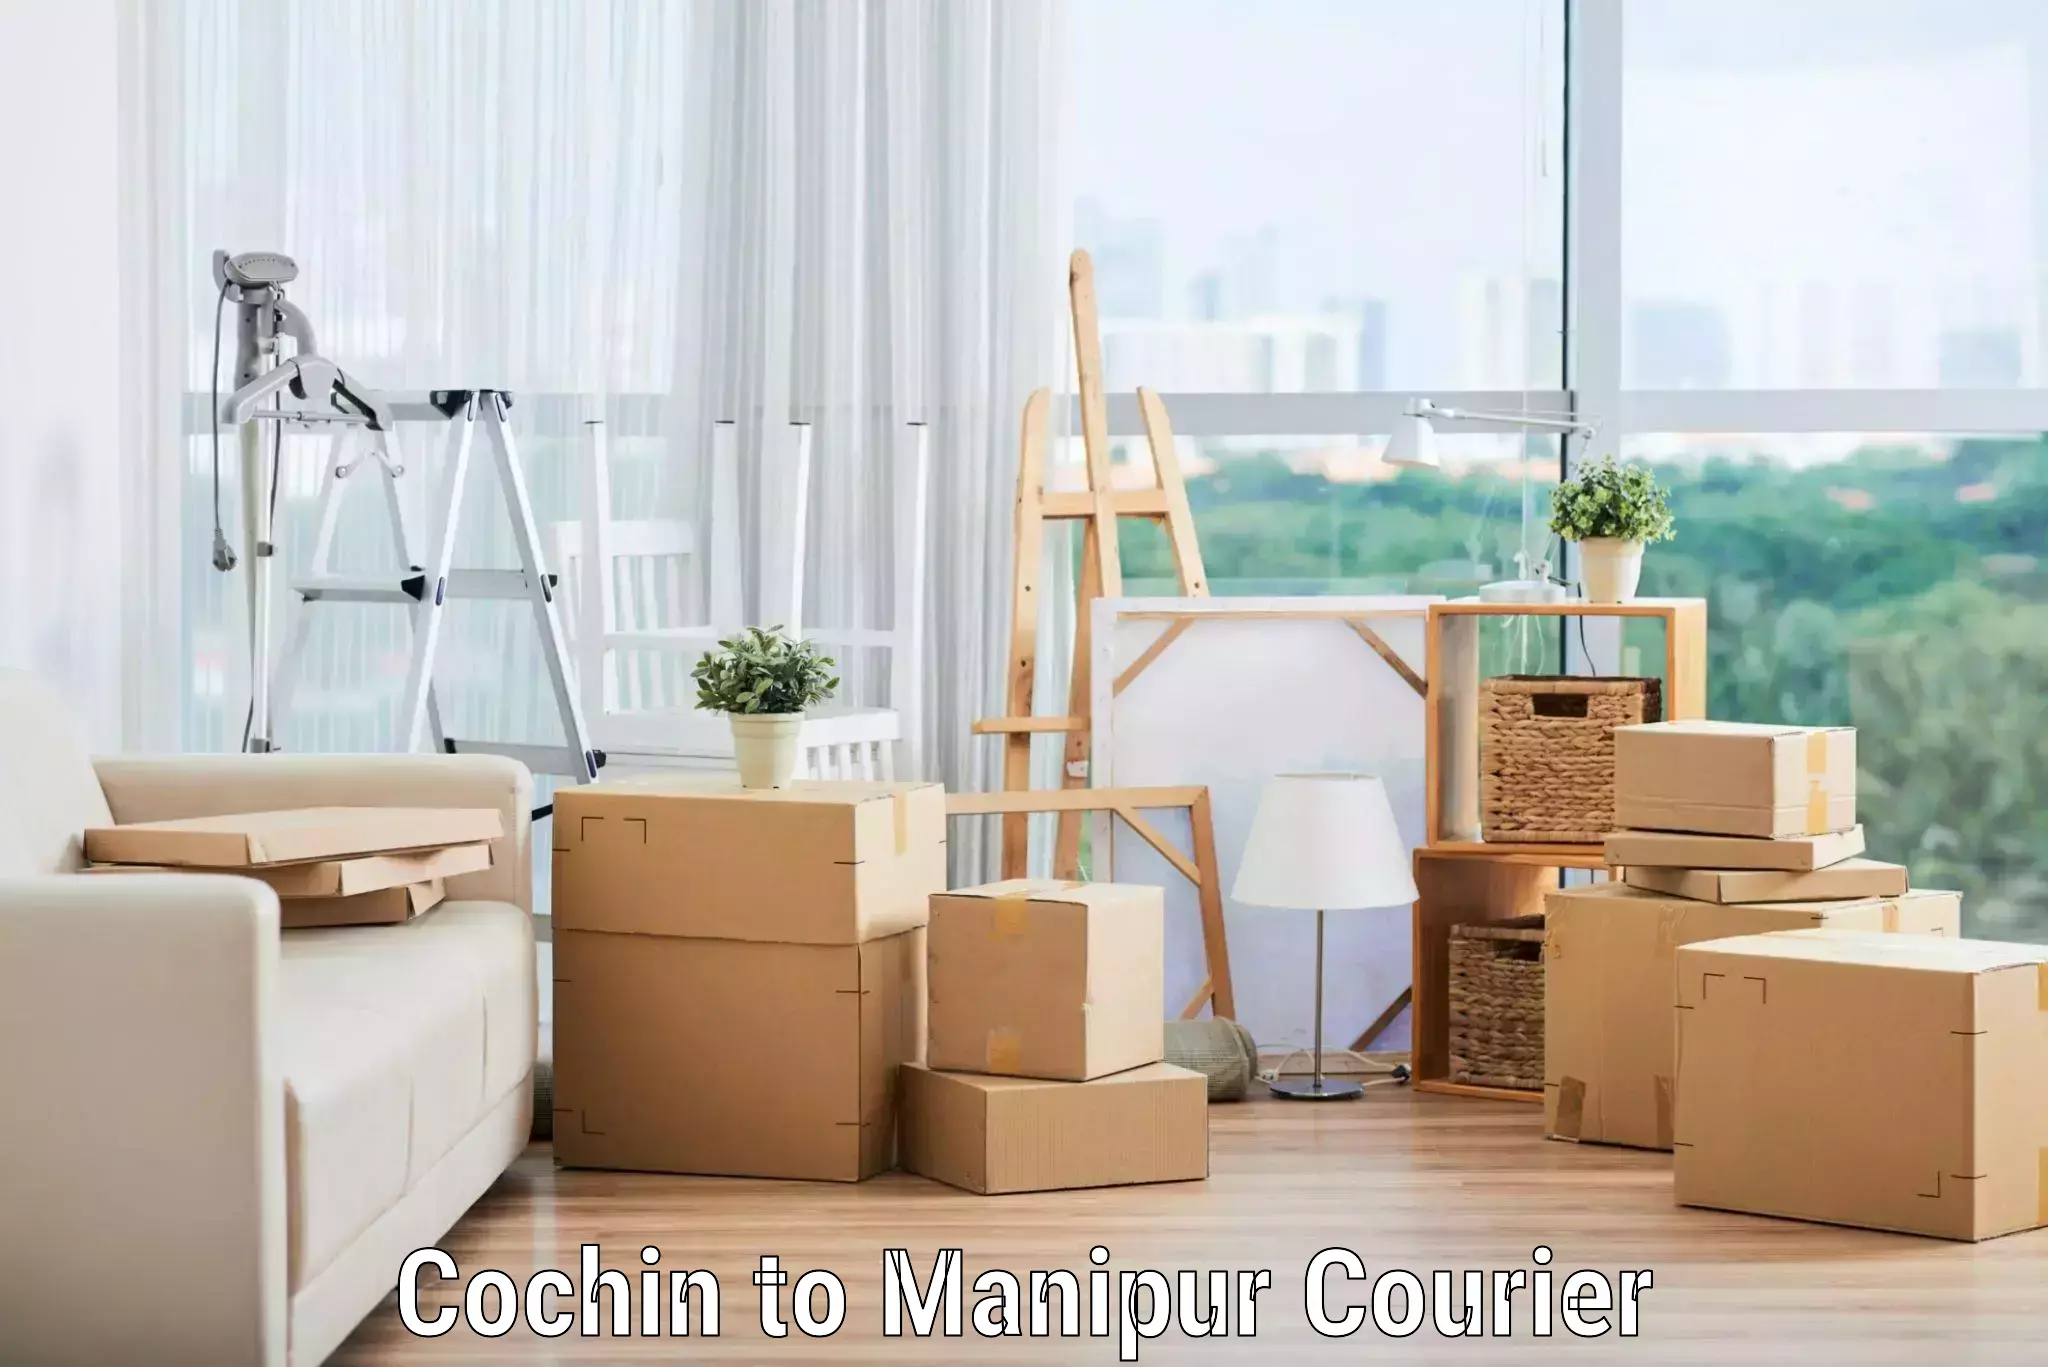 Furniture transport specialists Cochin to Manipur